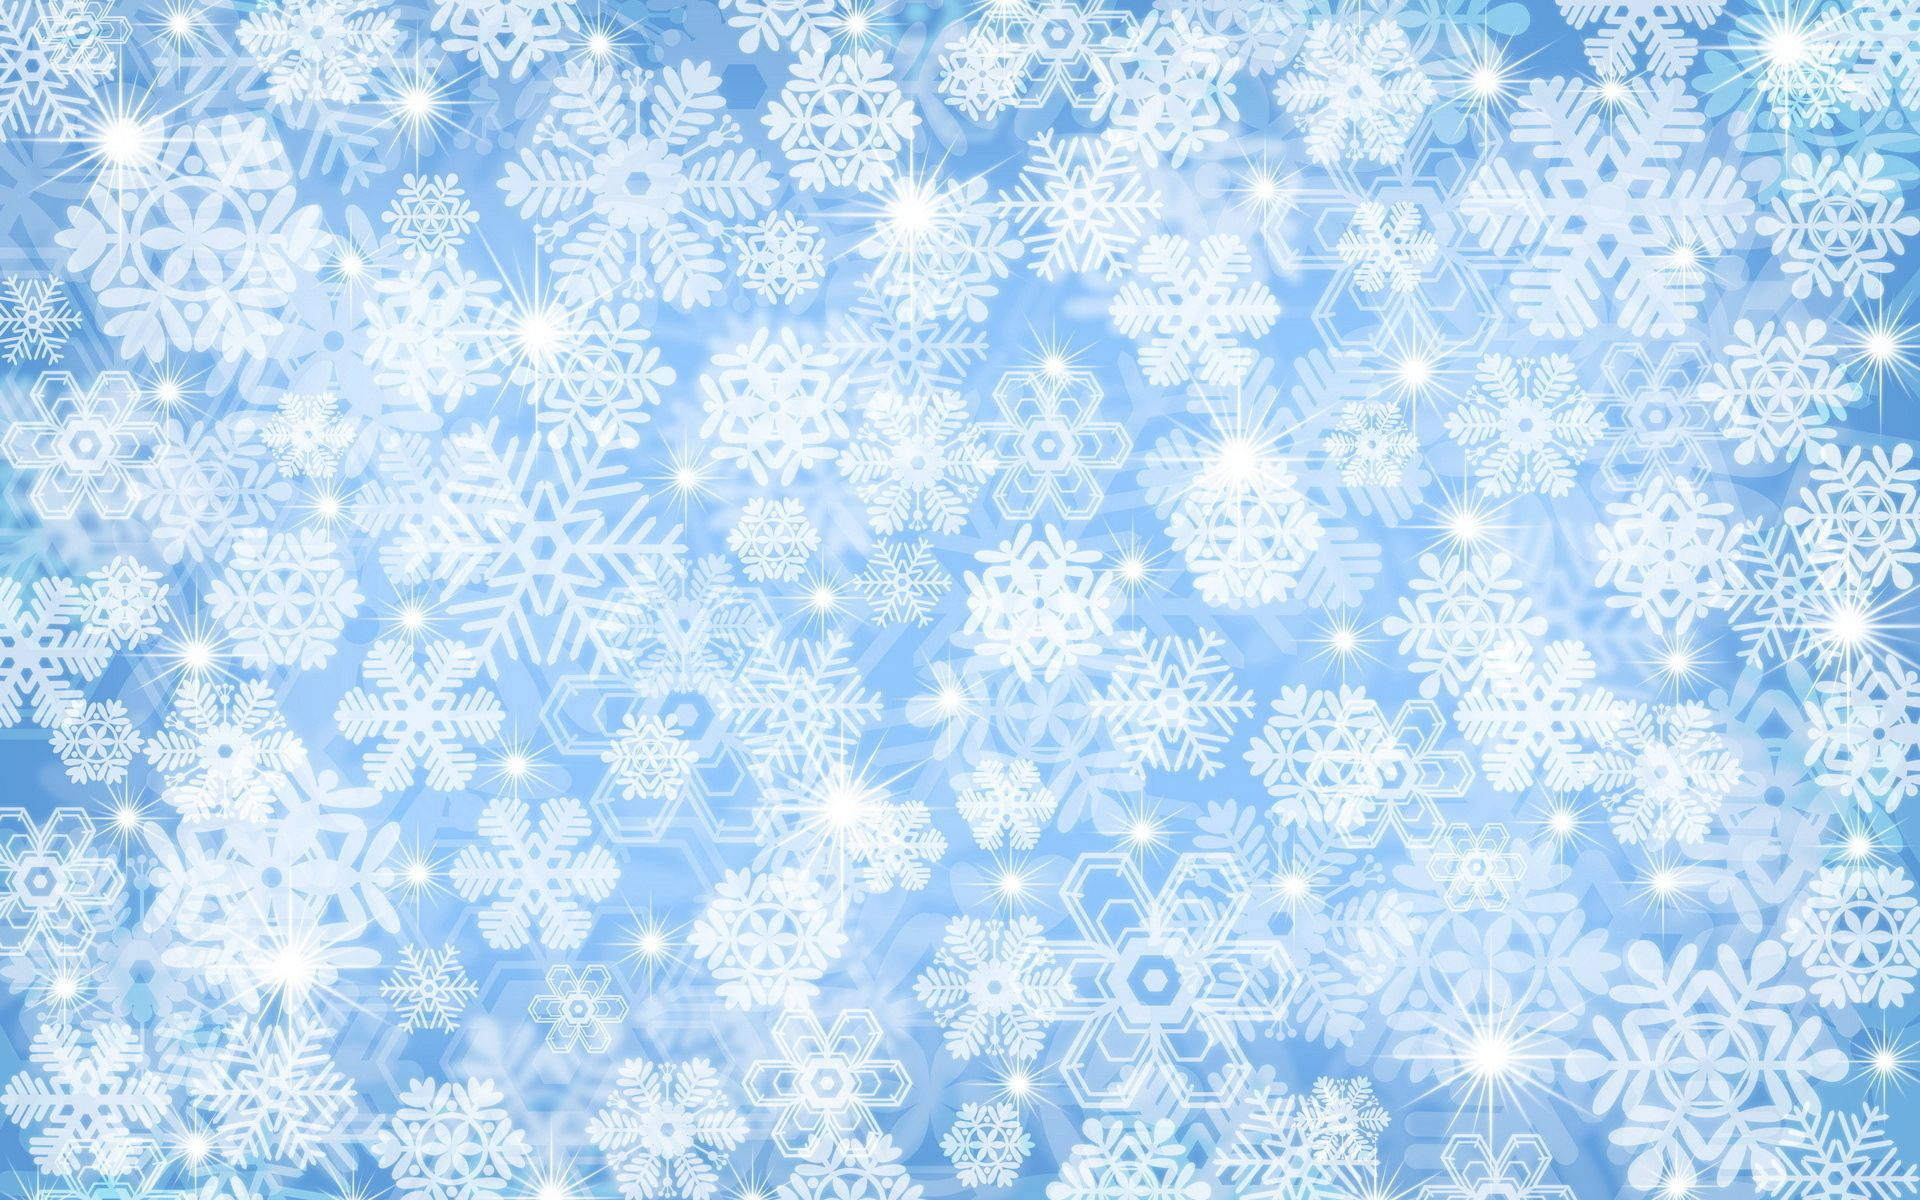 Sparkling Abstract Snowflakes